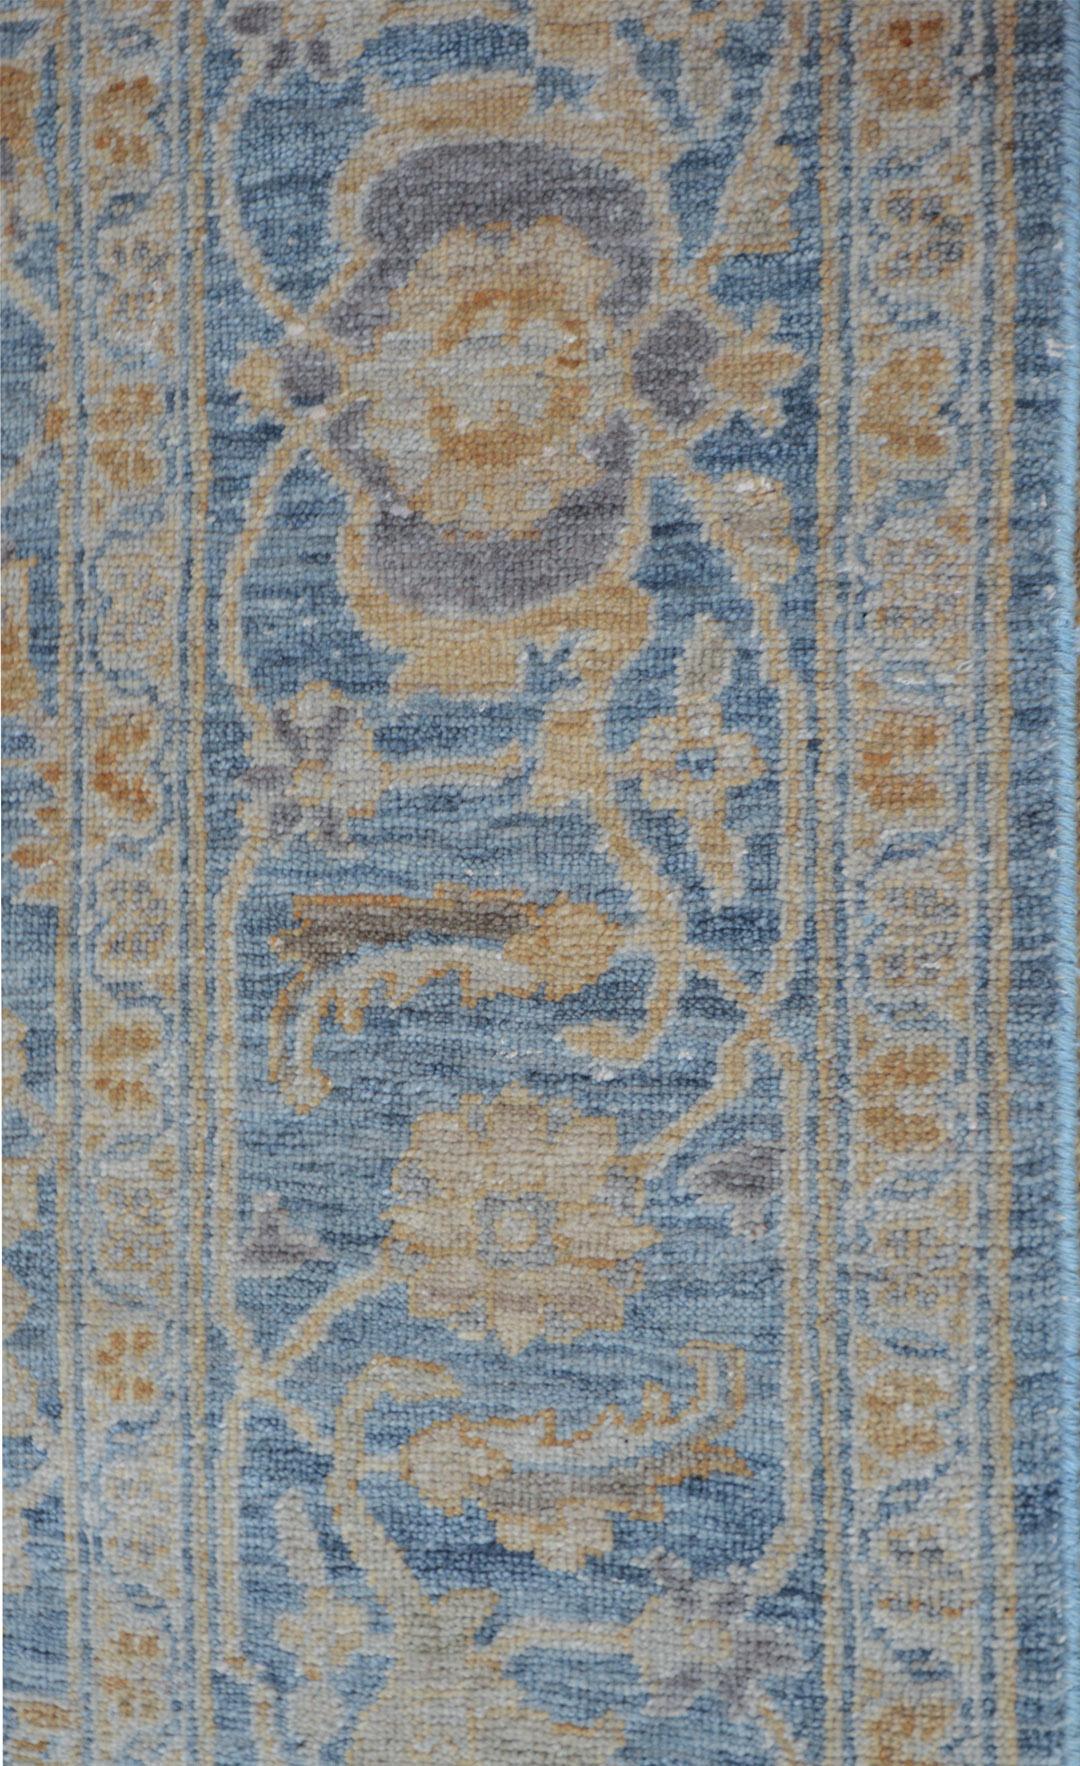 Handwoven by master weavers in Egypt, this extraordinary piece features a very soothing blue color field and the beautiful Classic Persian Tabriz design. 100% natural wool pile. Brand new.